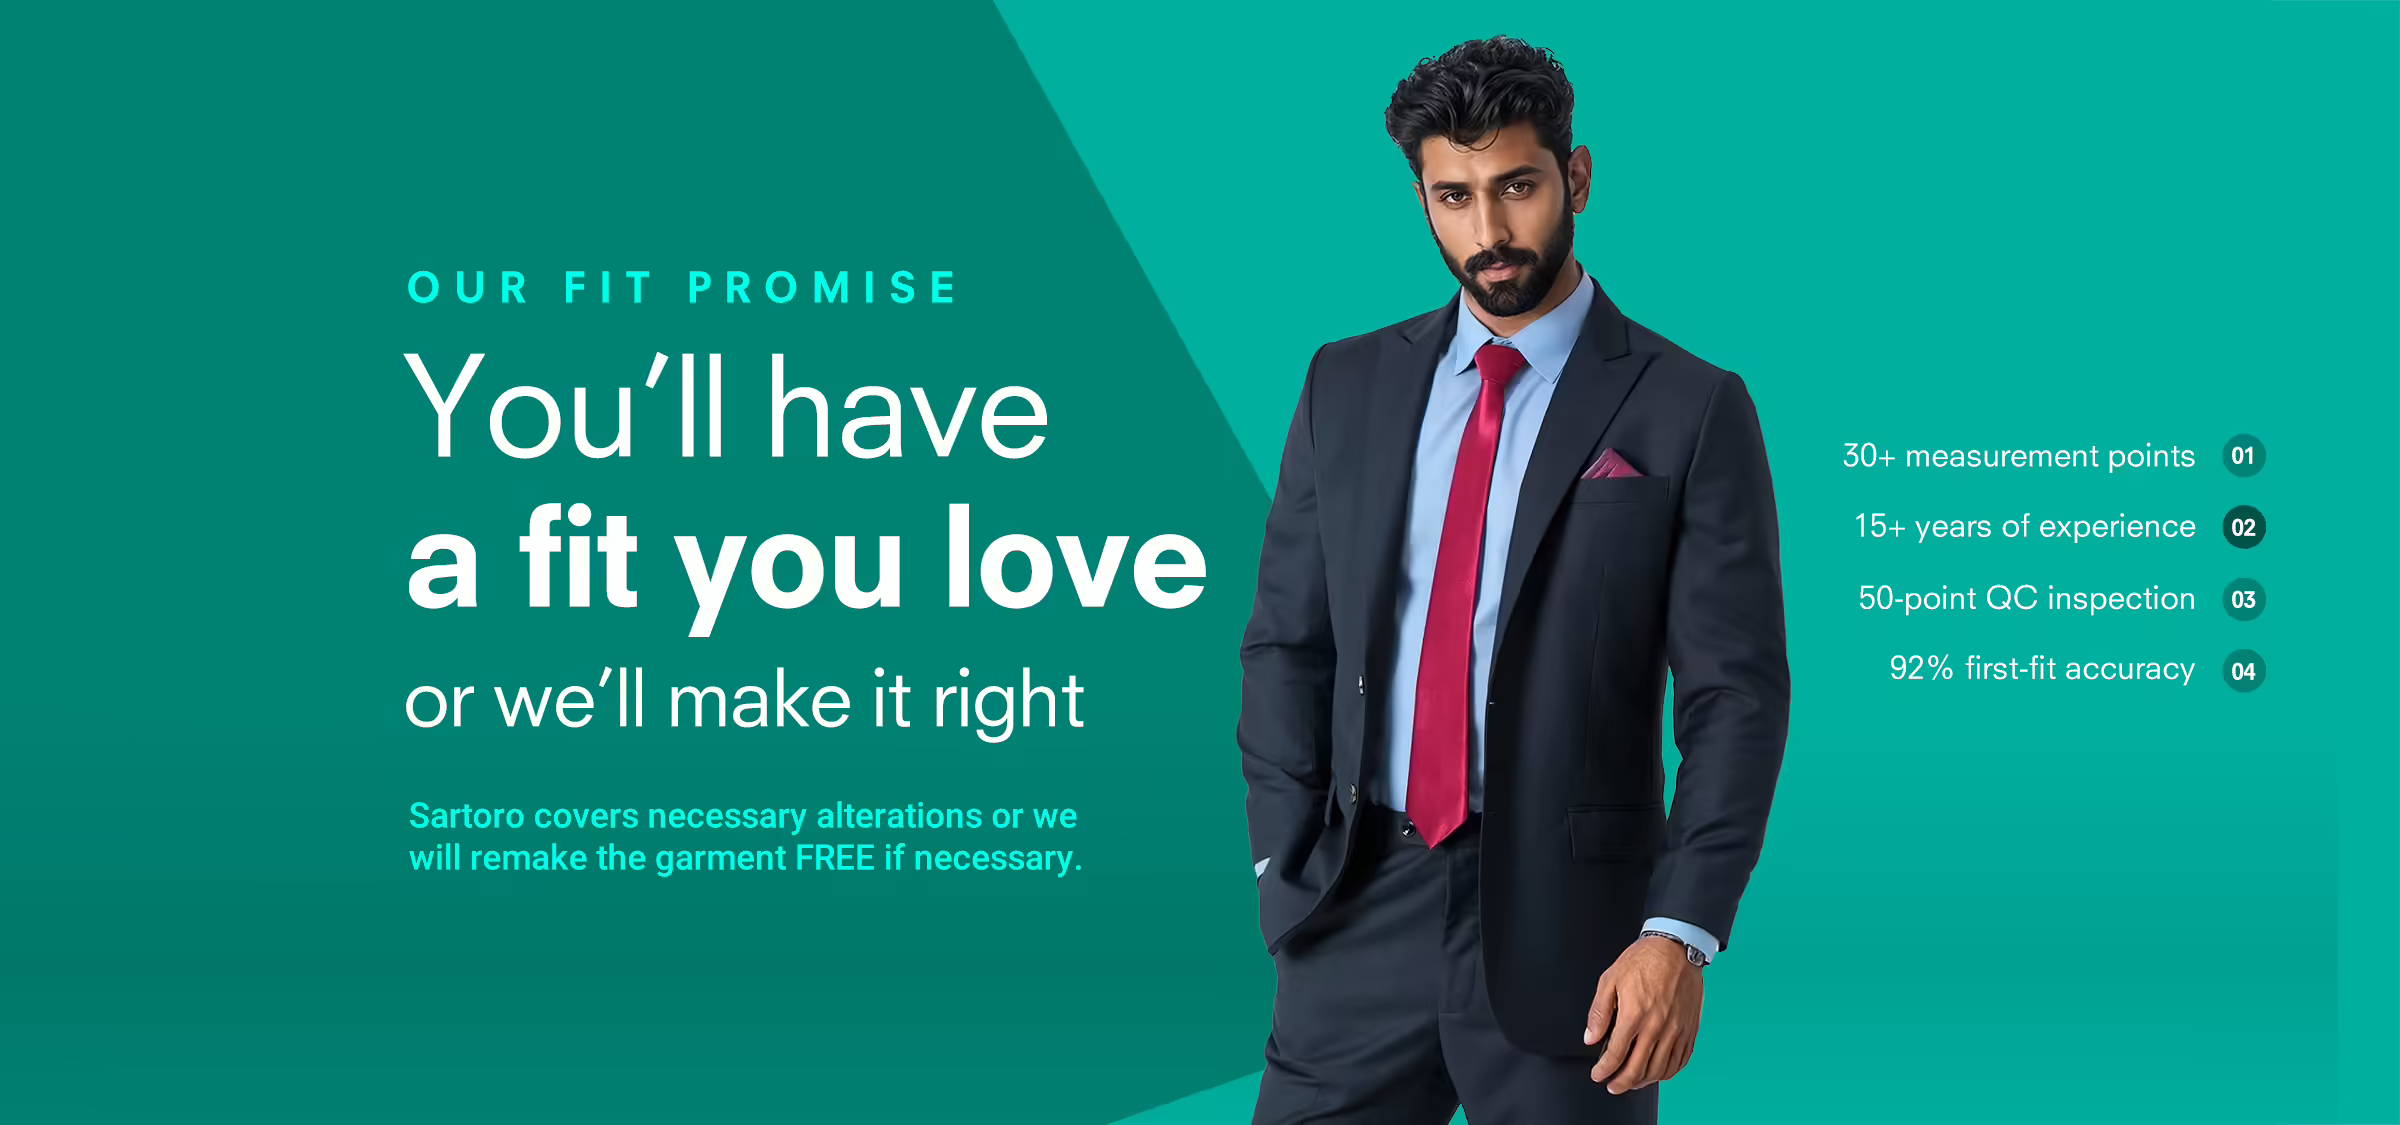 text saying Our fit promise - you'll have a fit you love or we'll make it right next to model in grey suit